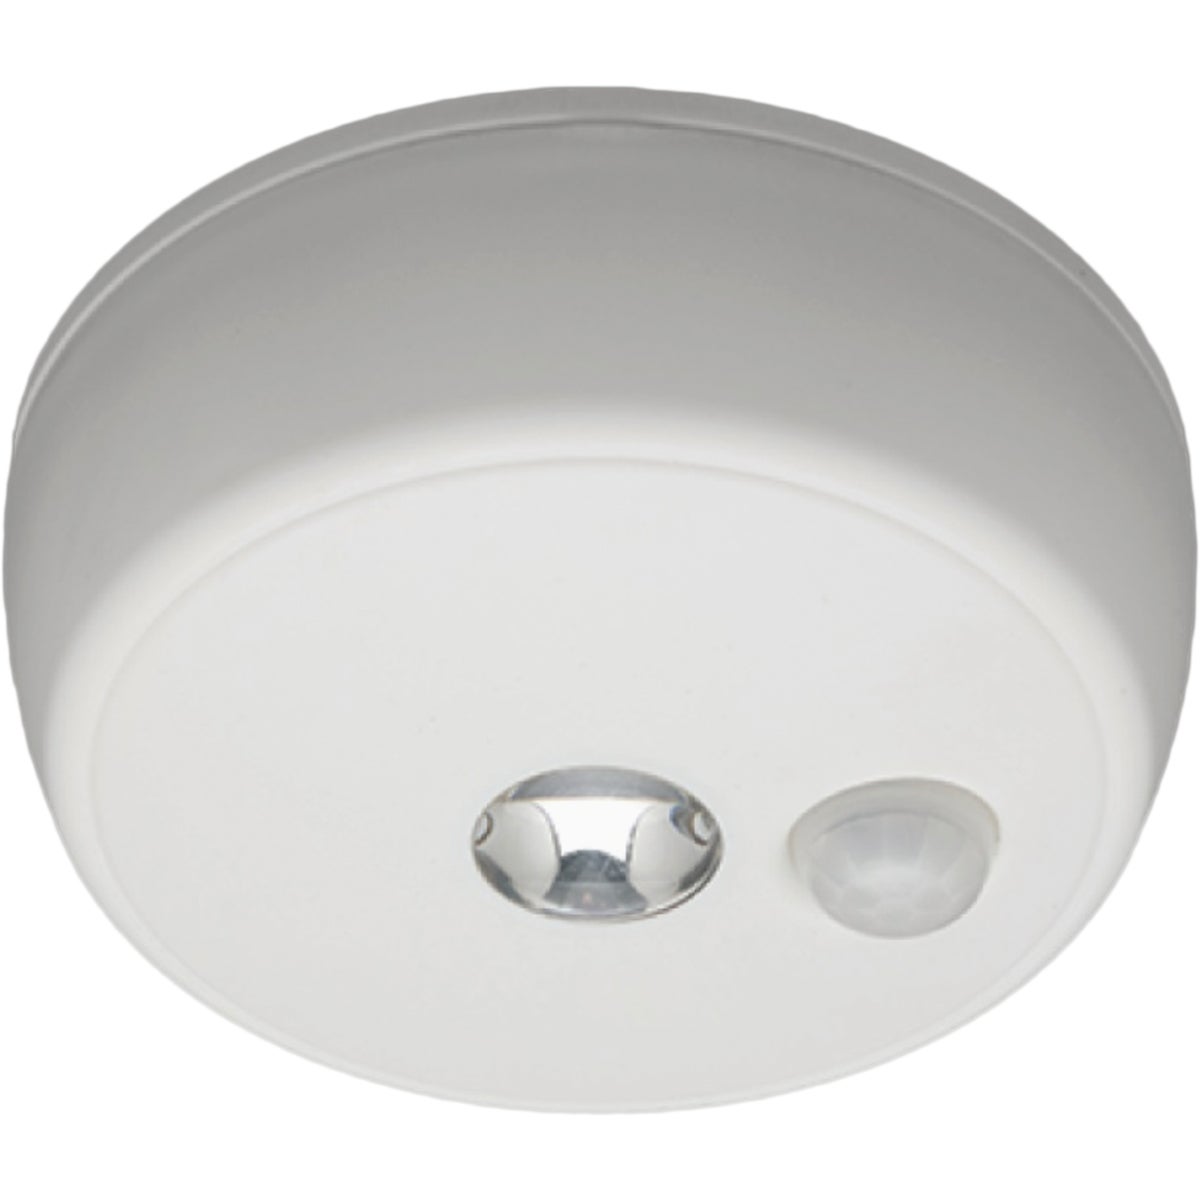 Item 501795, Hands free LED (light emitting diode) battery operated ceiling light.